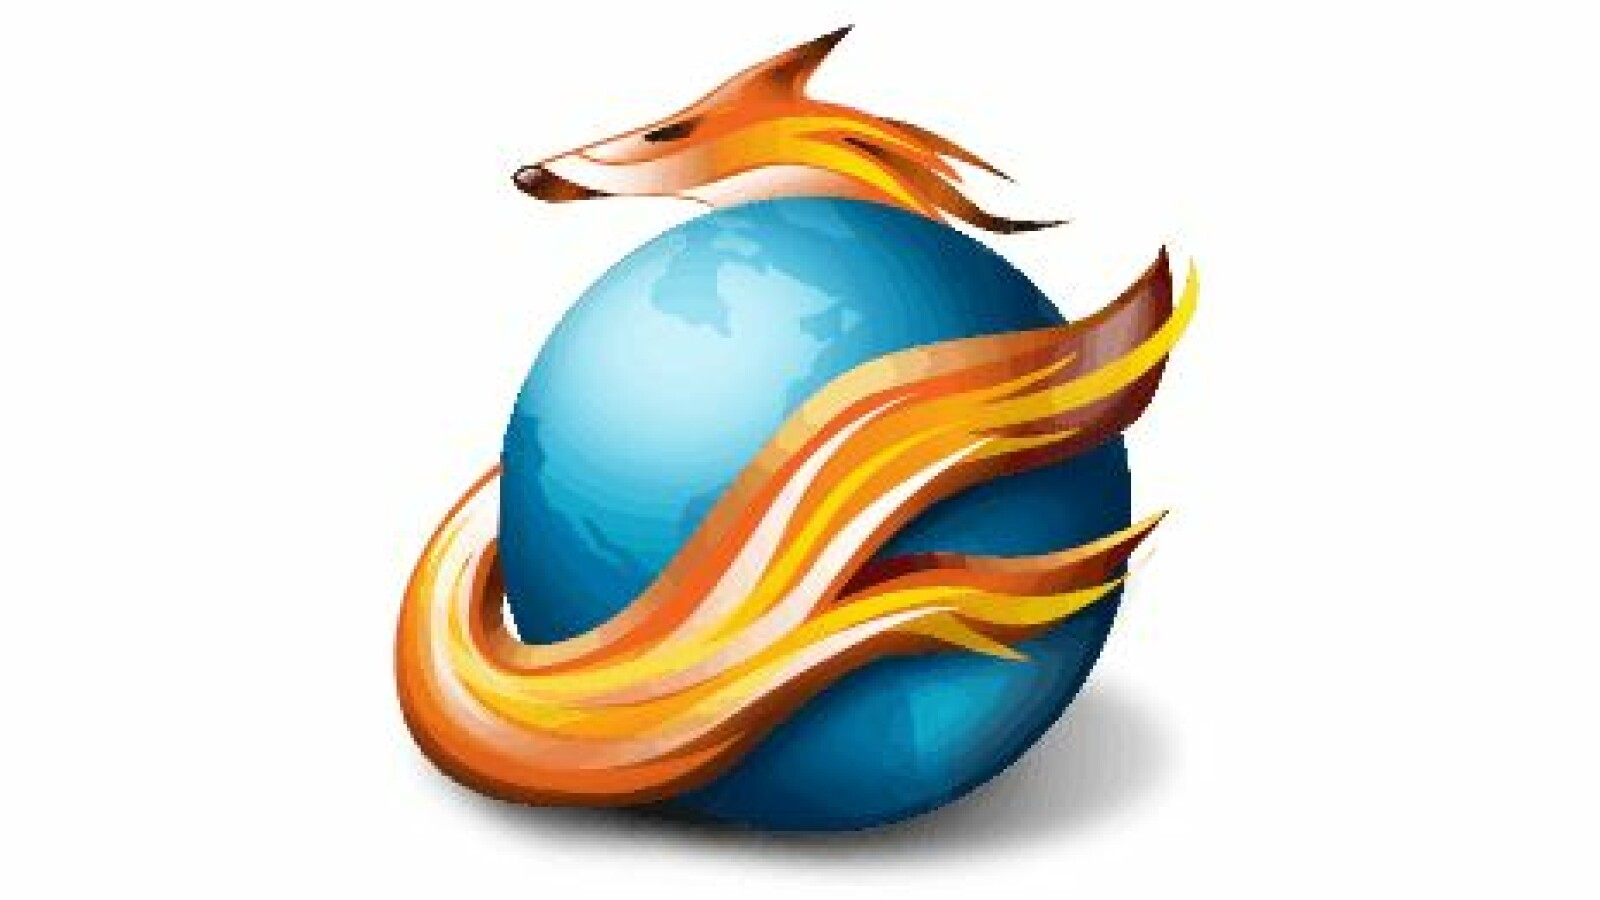 Firemin 9.8.3.8095 for ios download